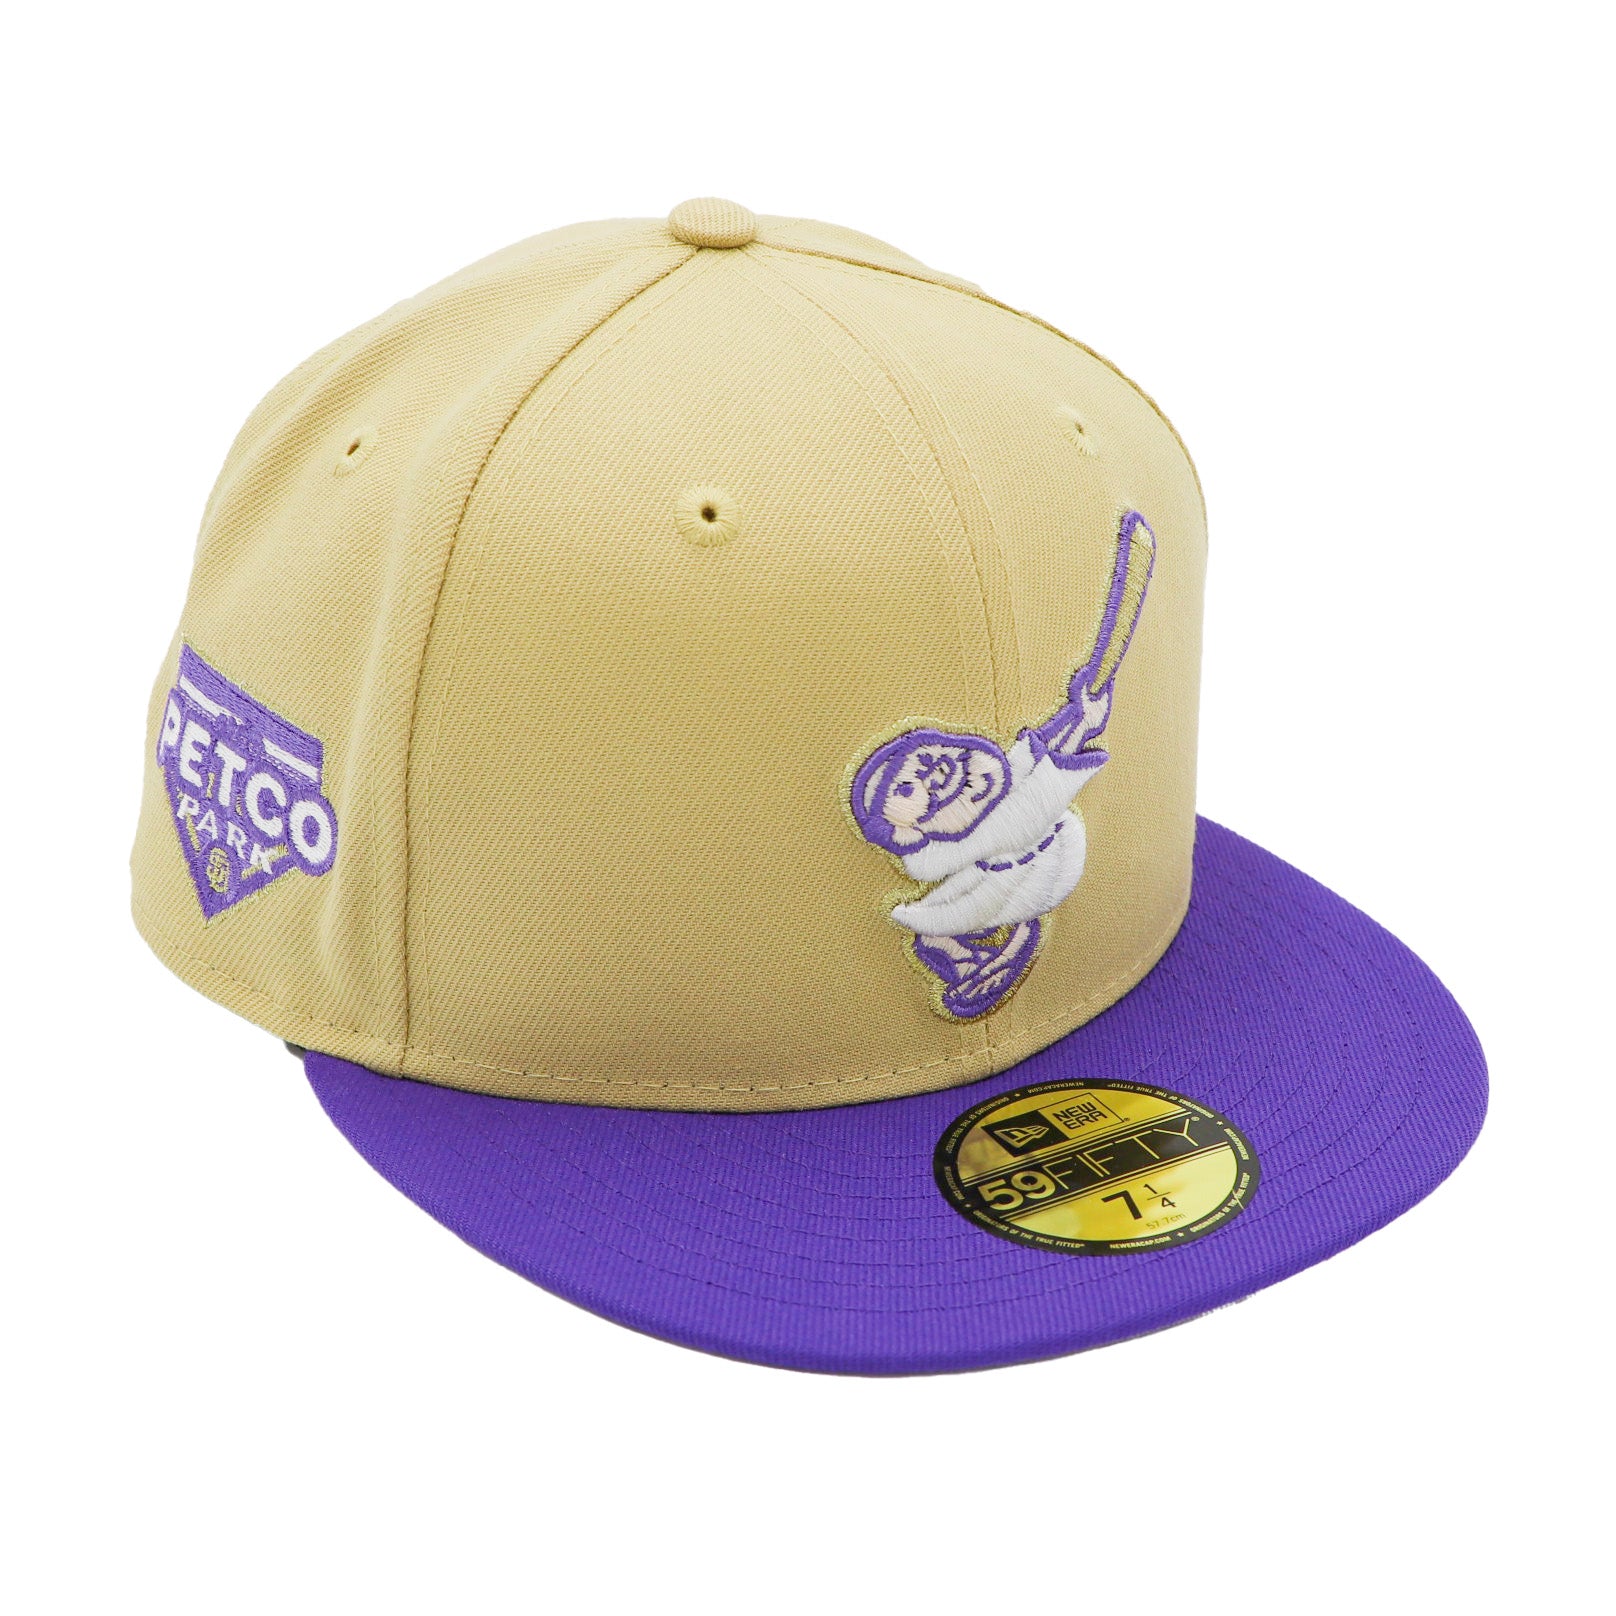 New Era 59fifty San Diego Padres Fitted Hat Tan/ – Caliwearsd